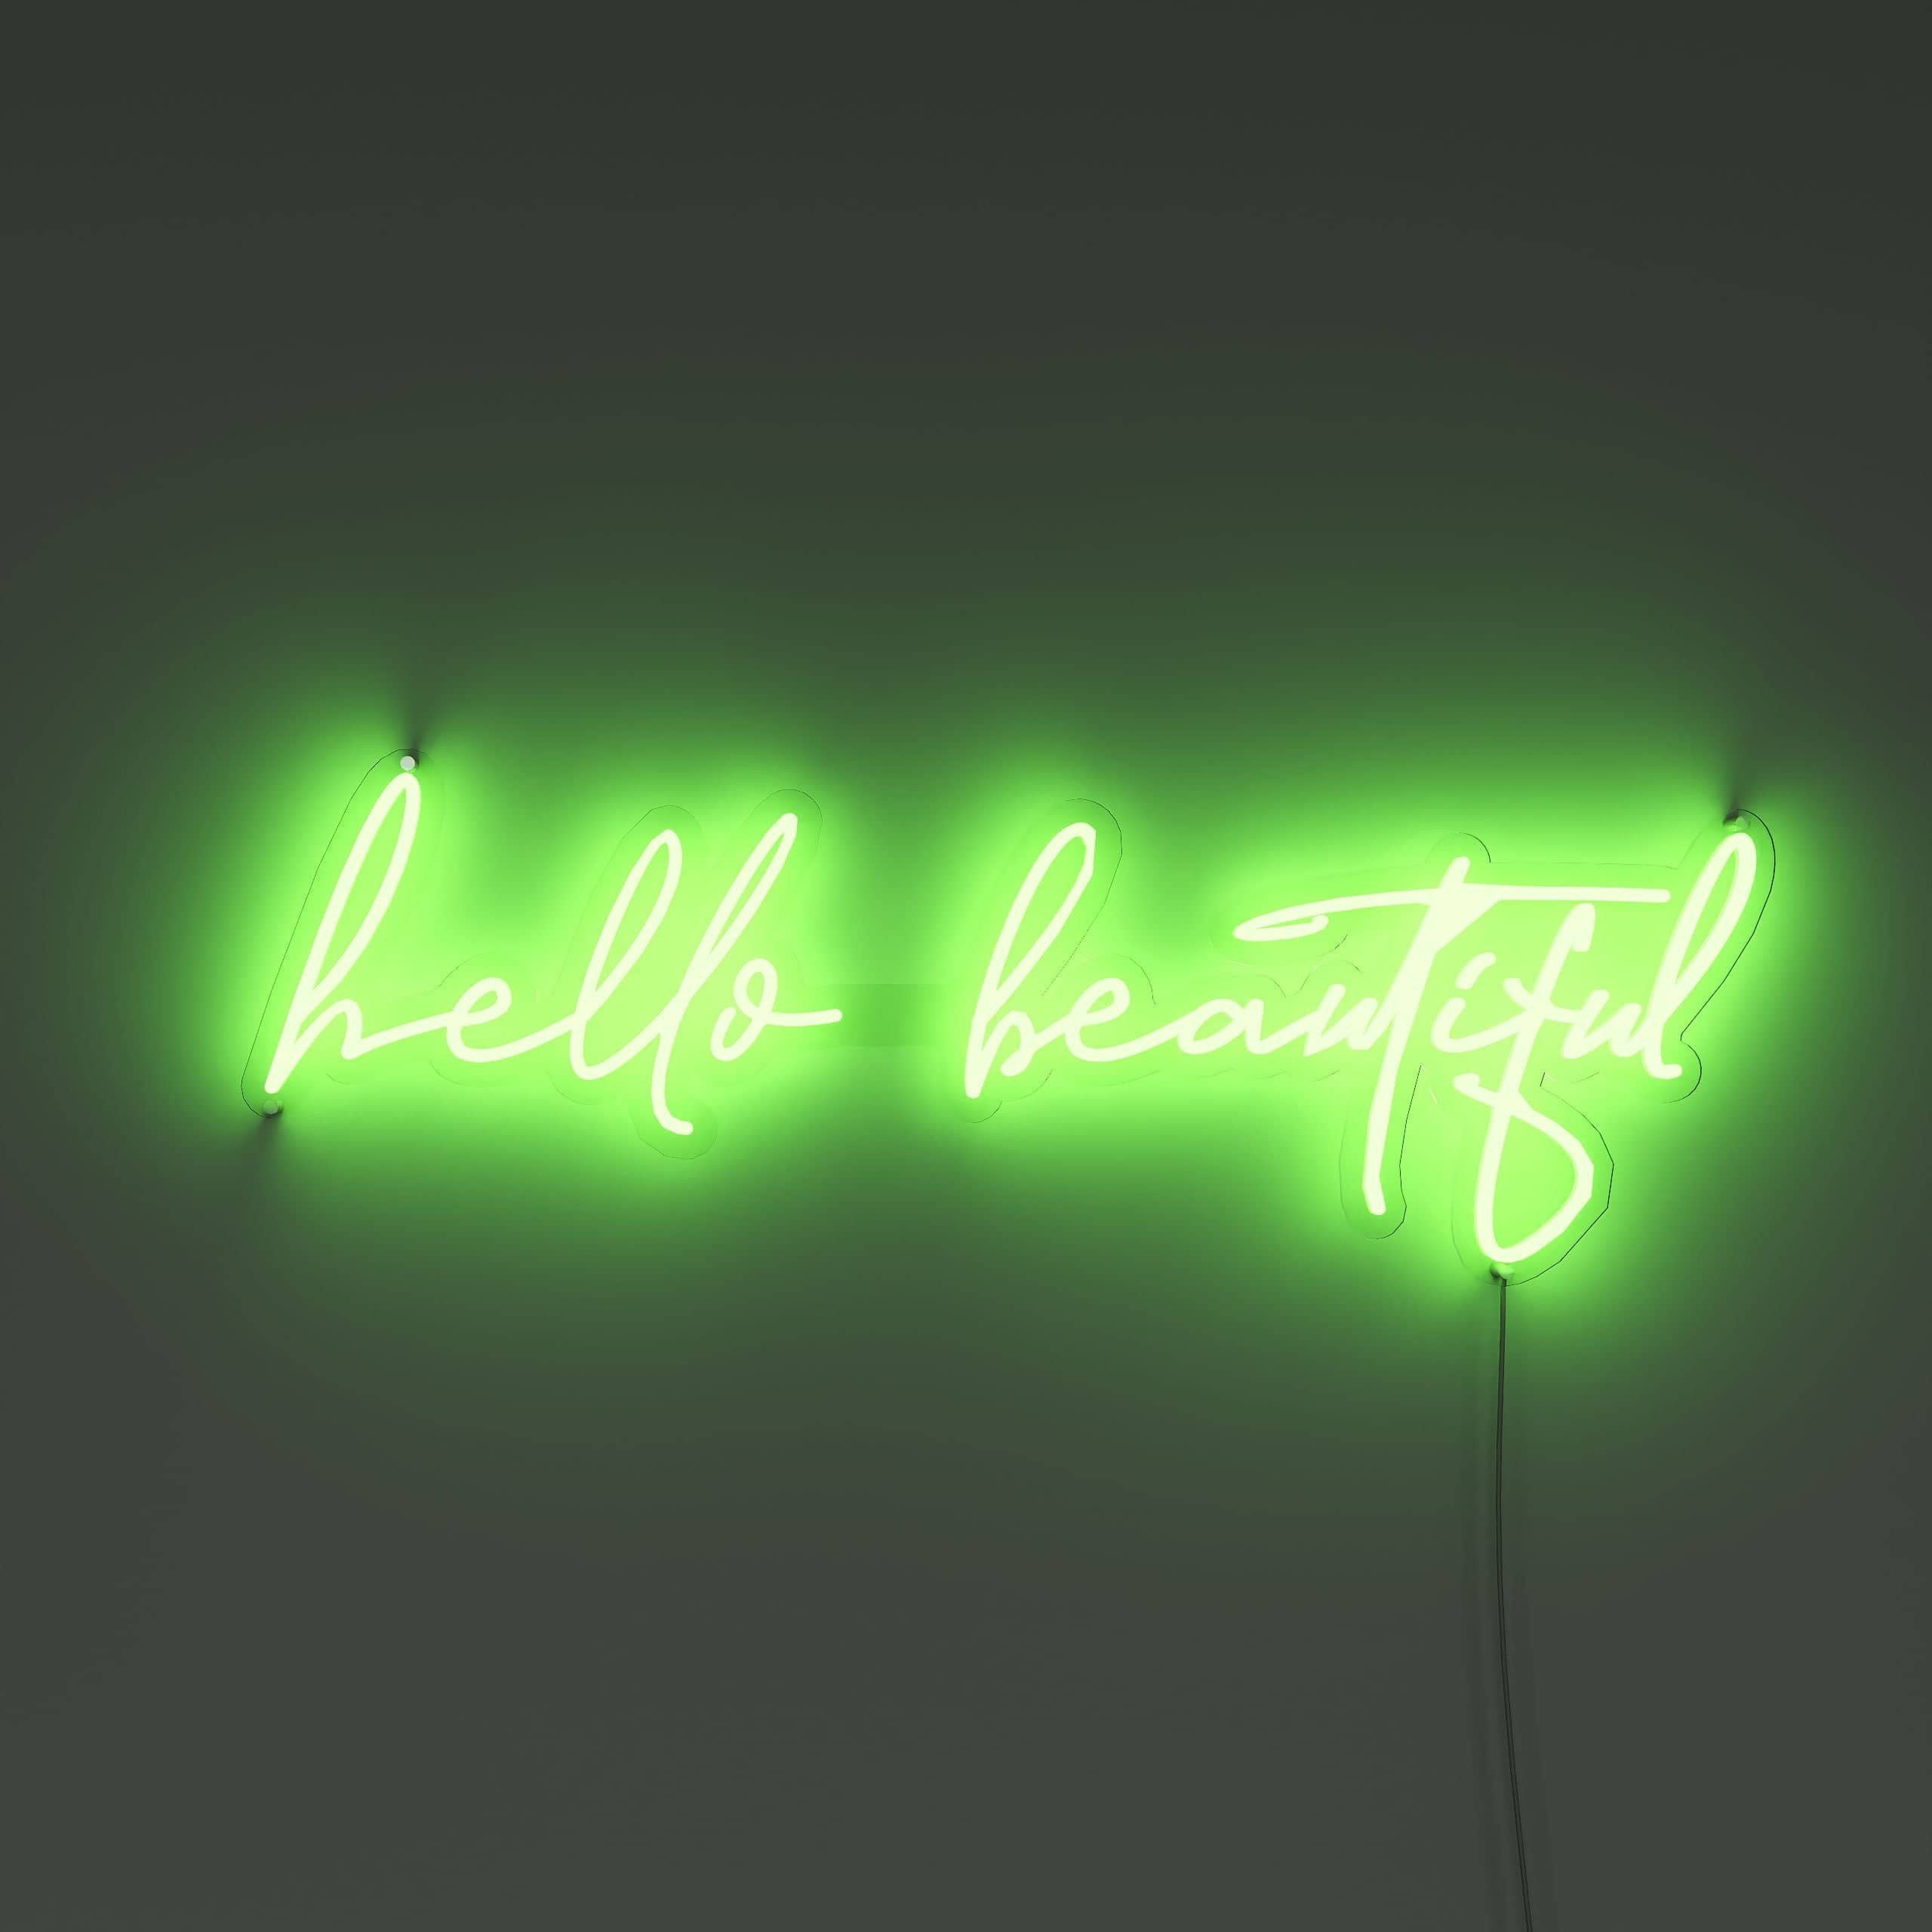 welcome,-beautiful-soul!-neon-sign-lite